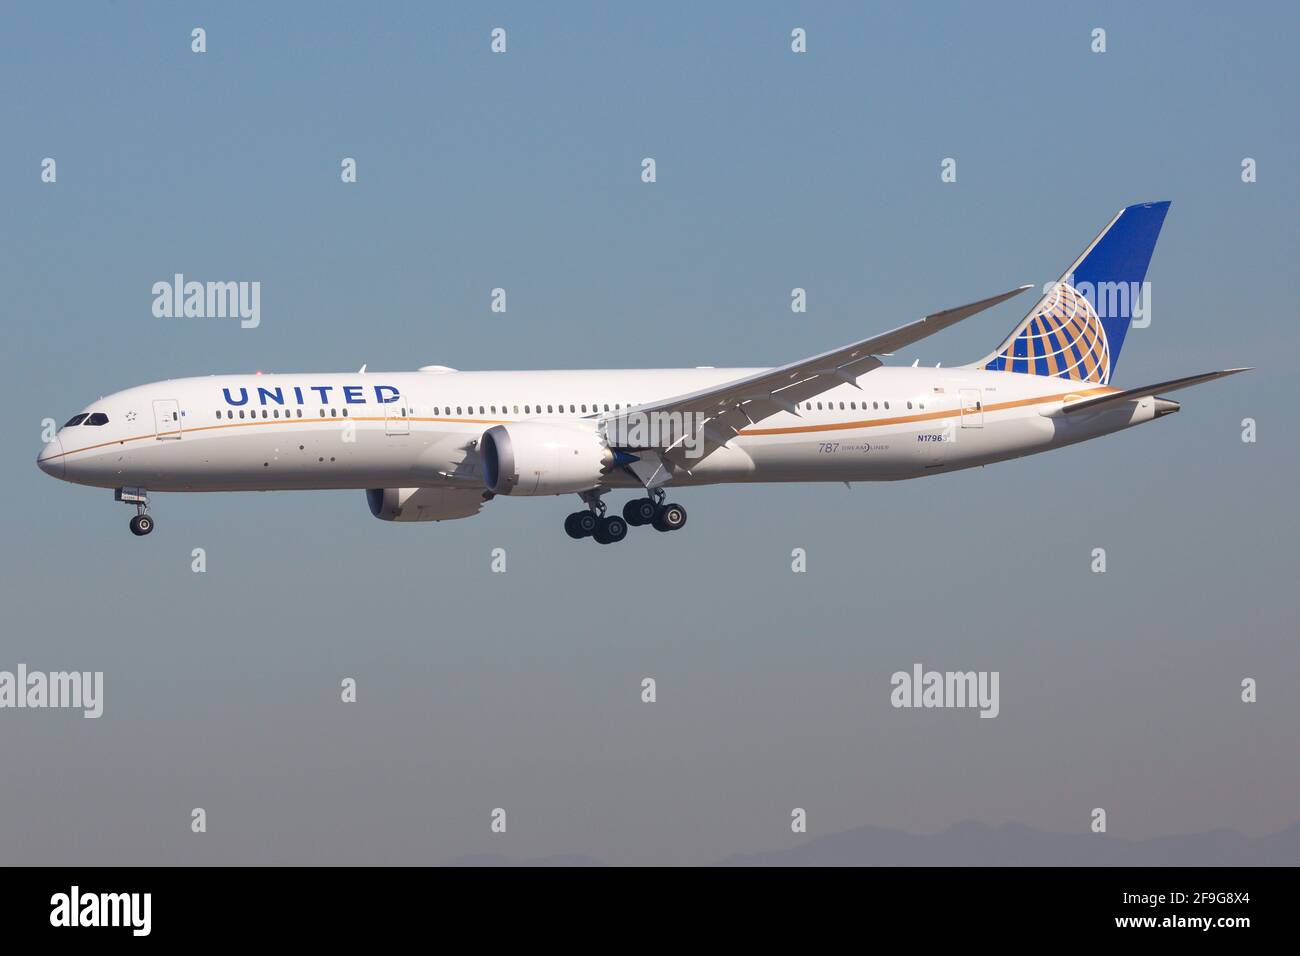 Los Angeles, USA - 22. February 2016: United Airlines Boeing 787-9 at Los Angeles airport (LAX) in the USA. Boeing is an aircraft manufacturer based i Stock Photo